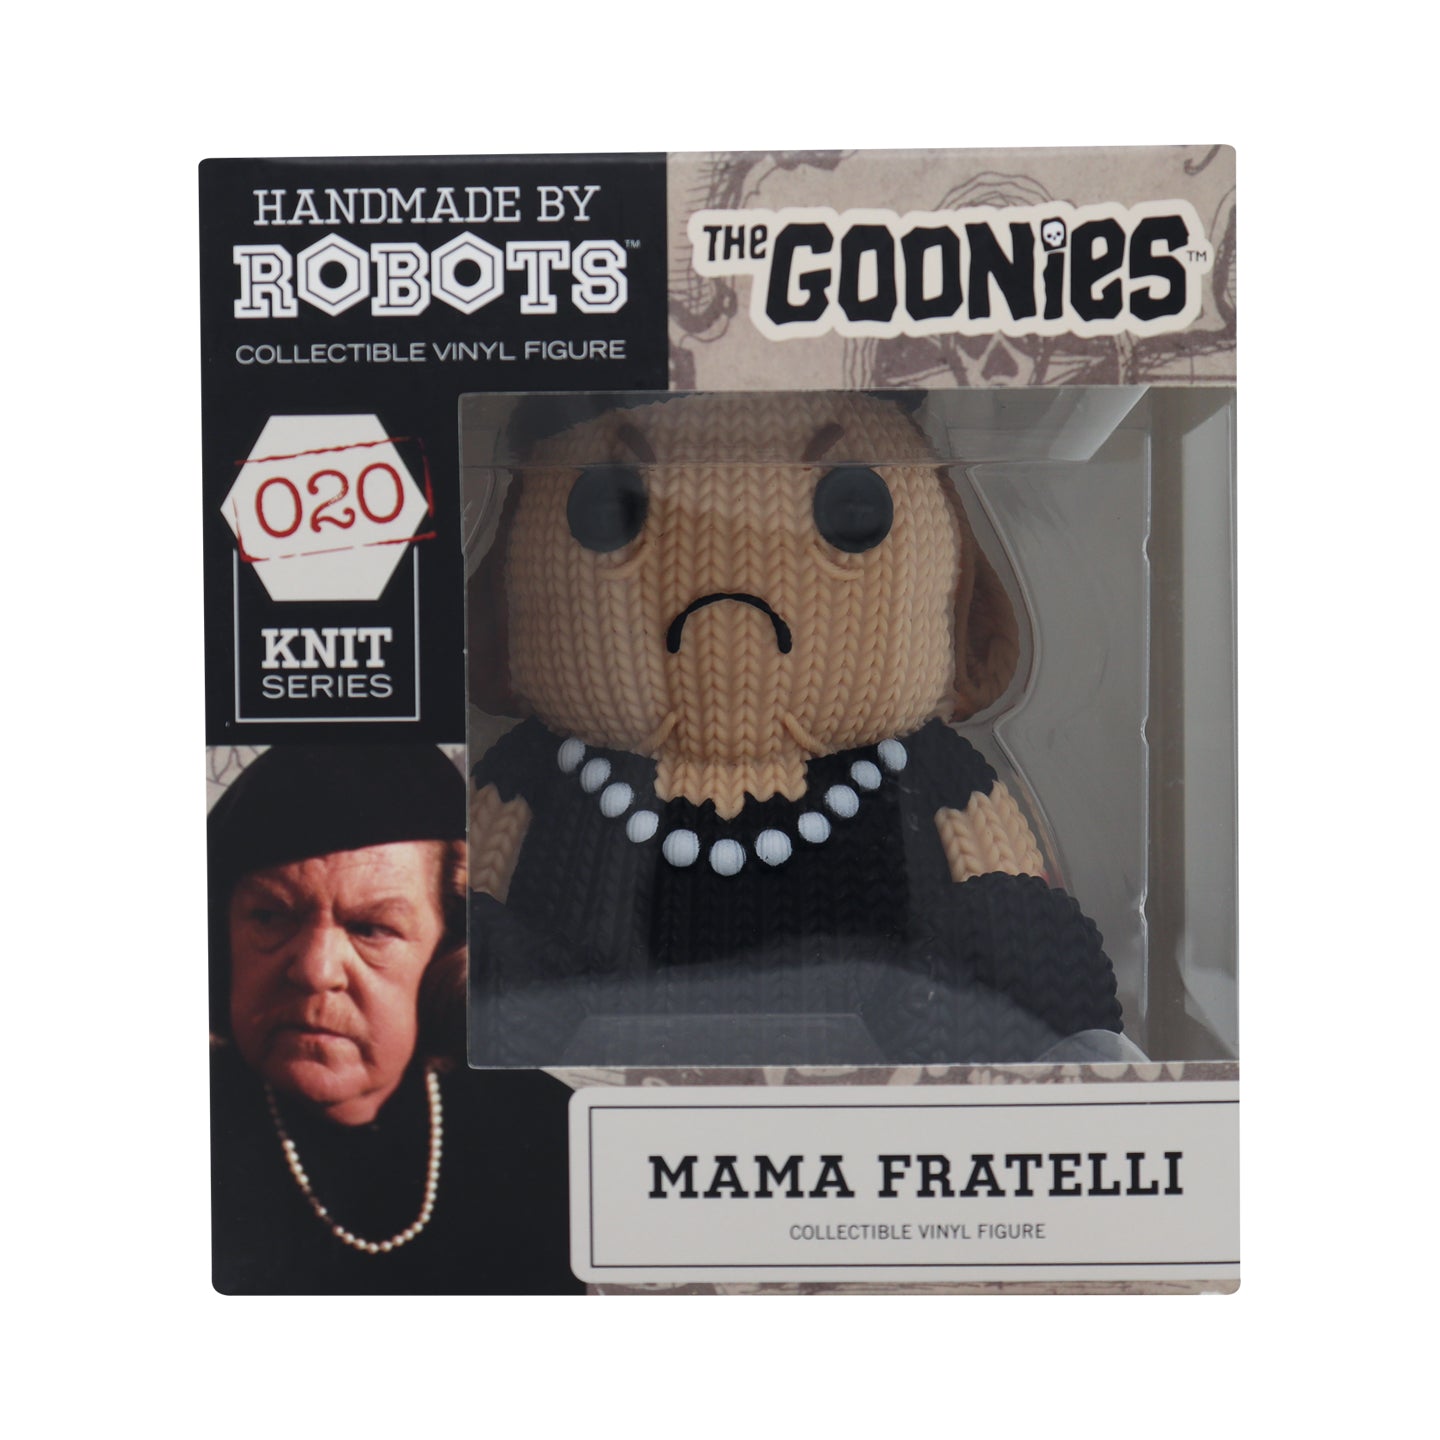 The Goonies - Mama Fratelli Collectible Vinyl Figure from Handmade By Robots